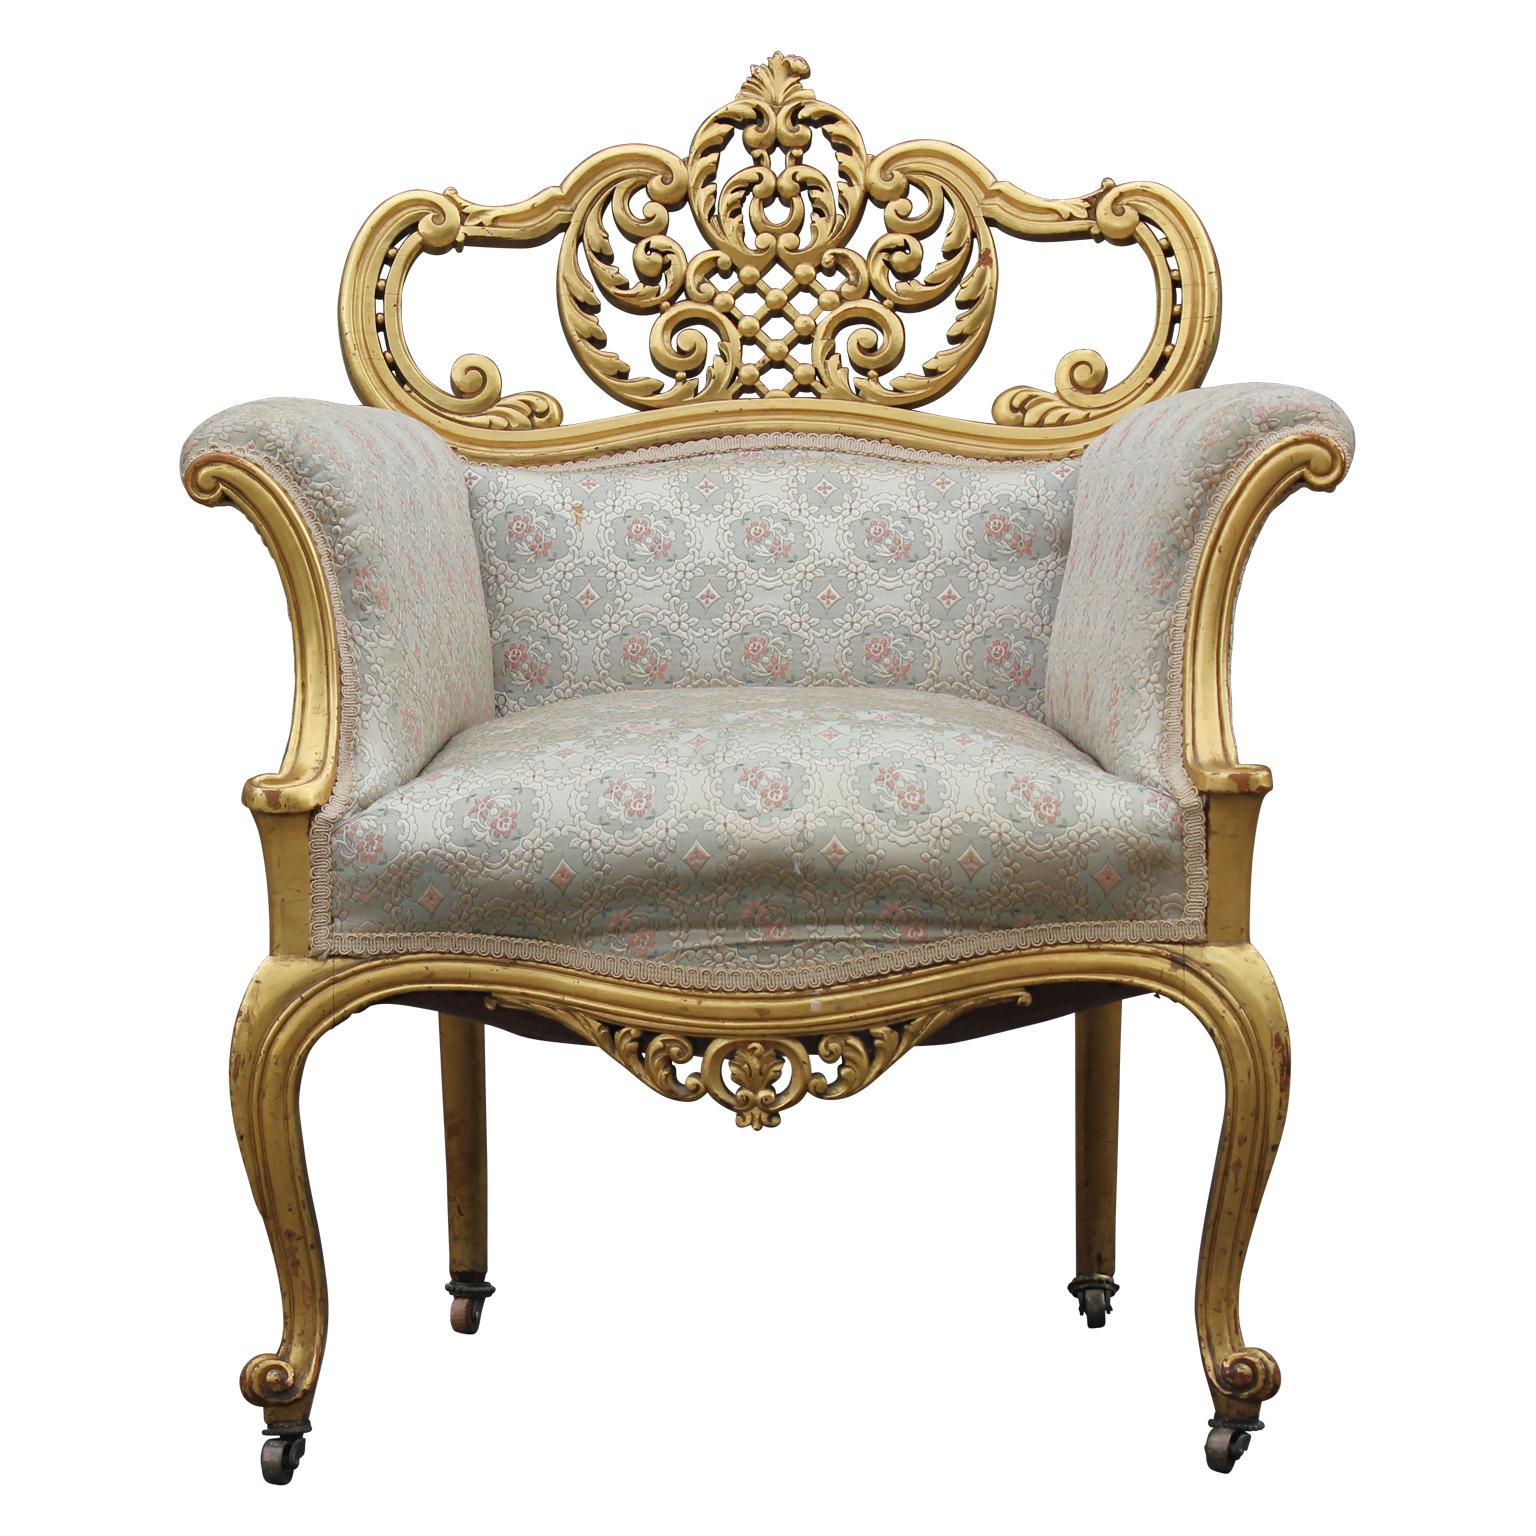 White and Gold Leaf Regal Hollywood Regency Boudoir Chair